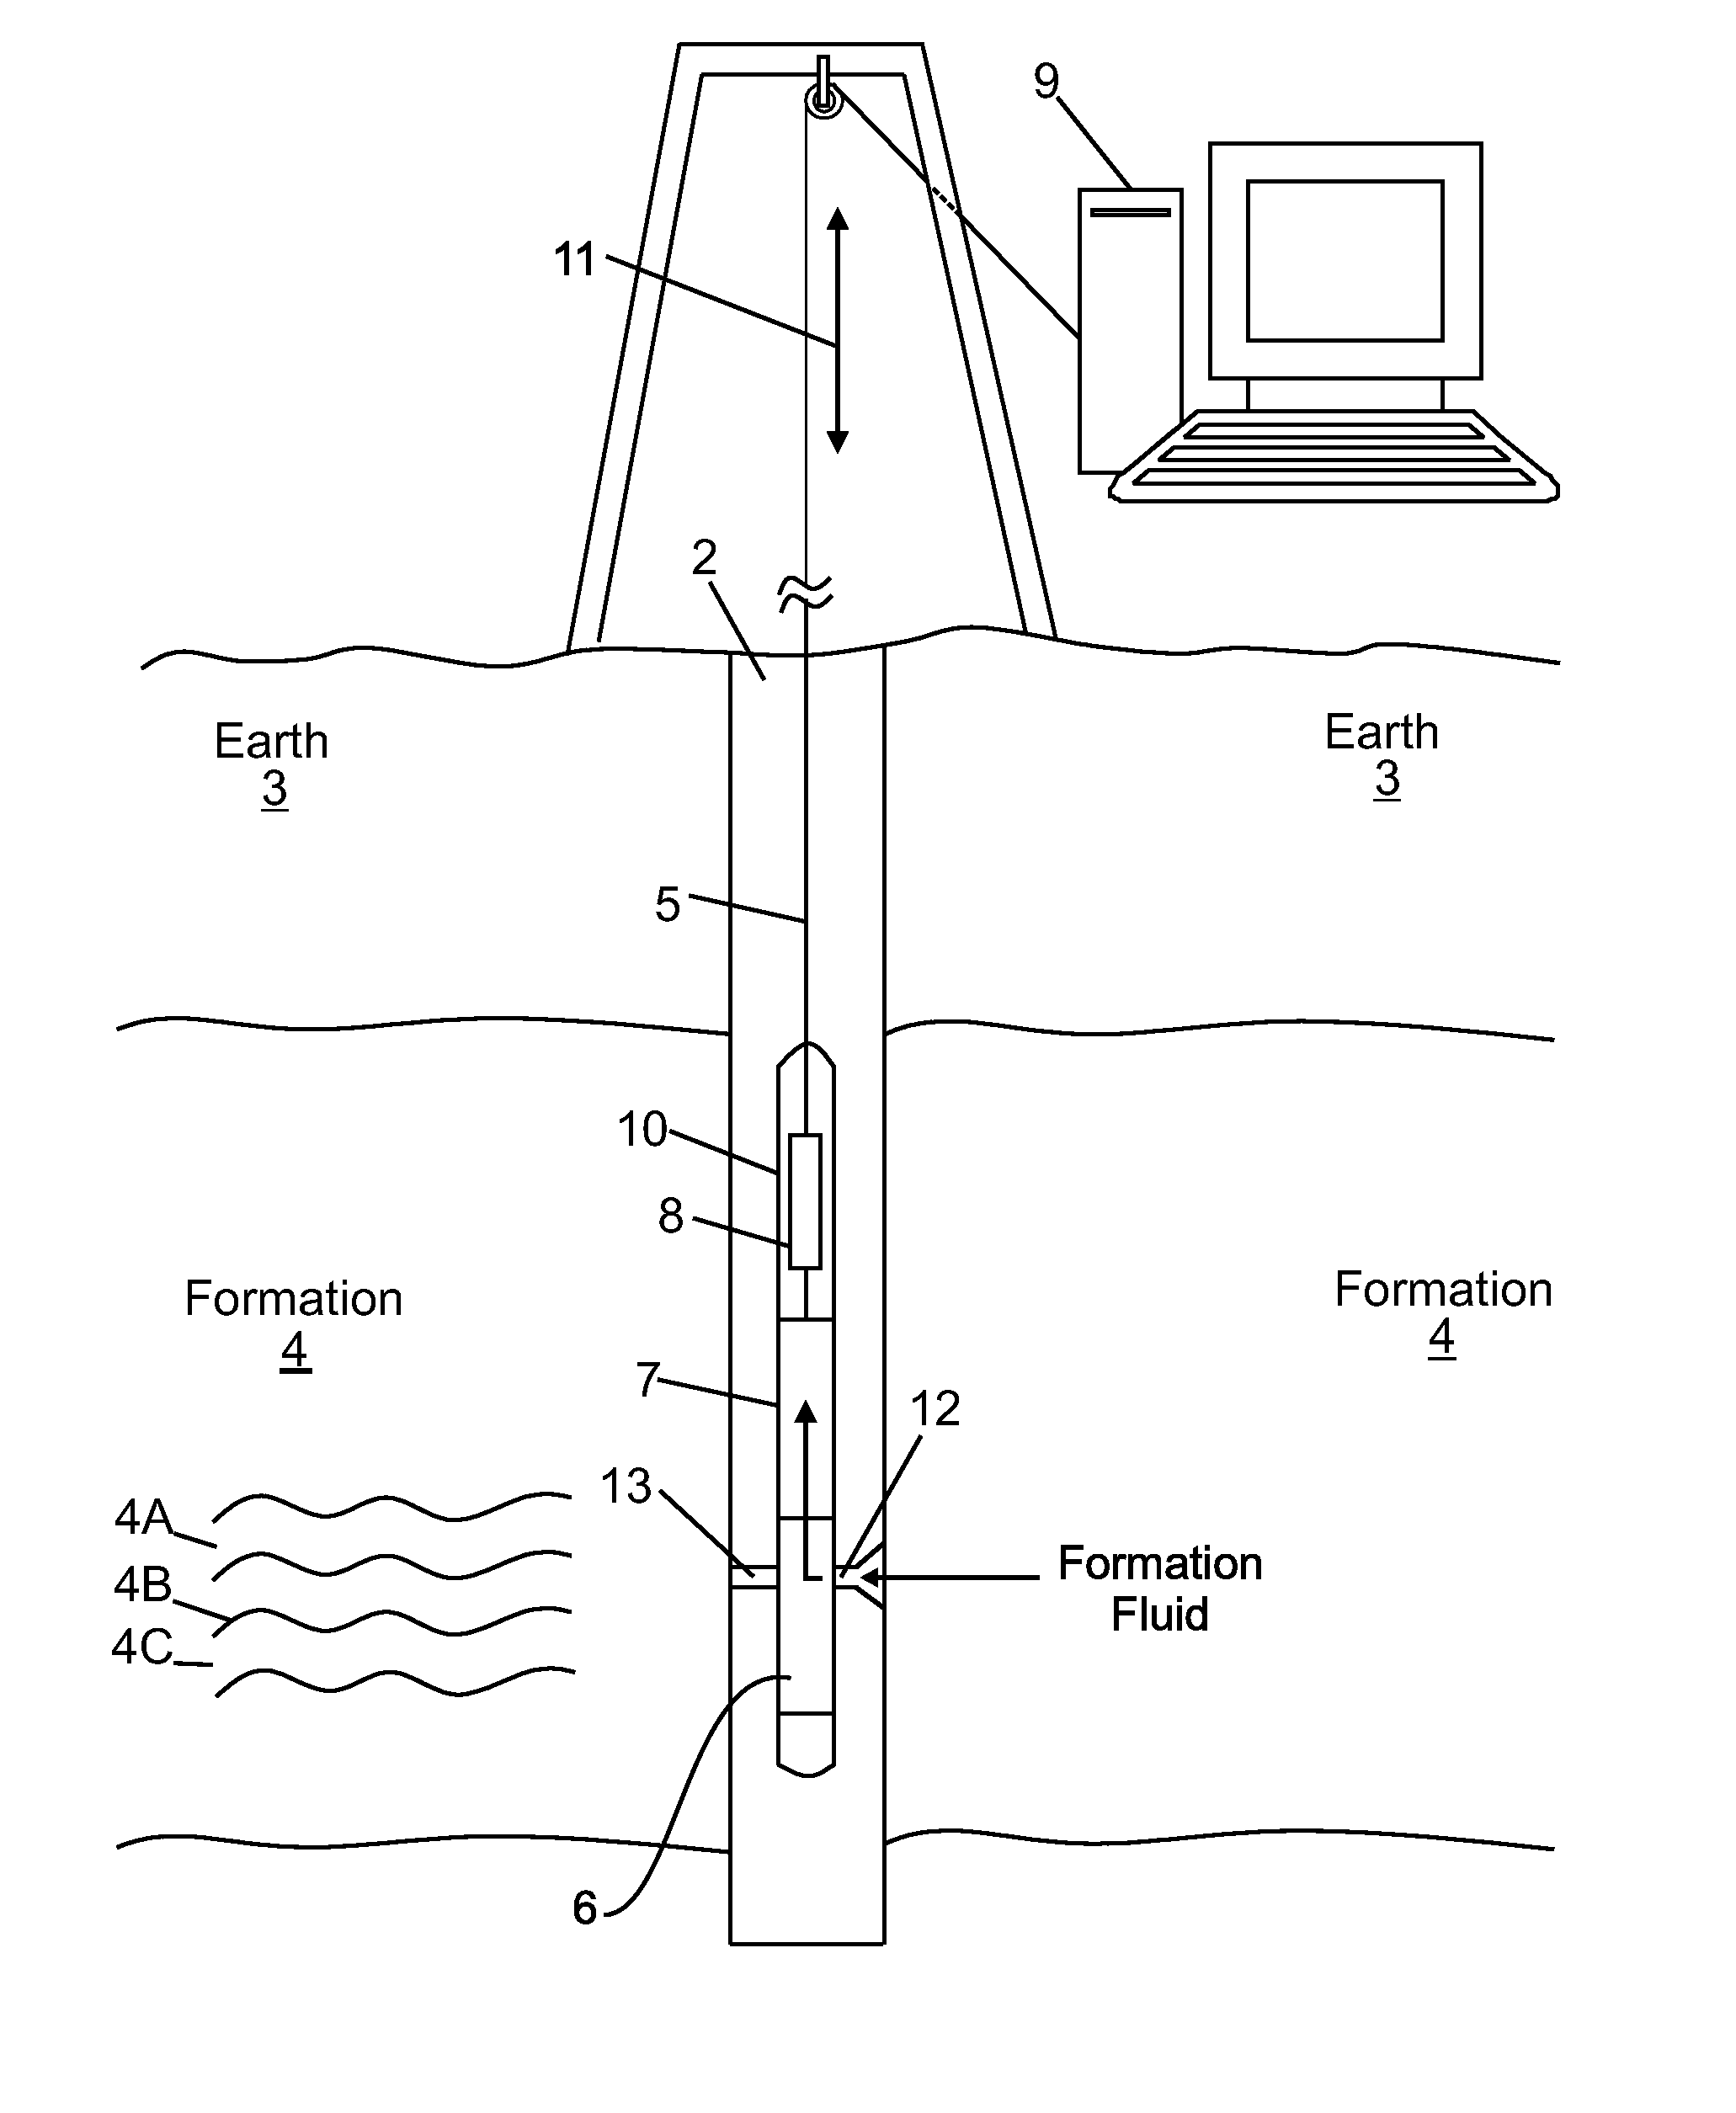 Dielectric spectroscopy for downhole fluid analysis during formation testing